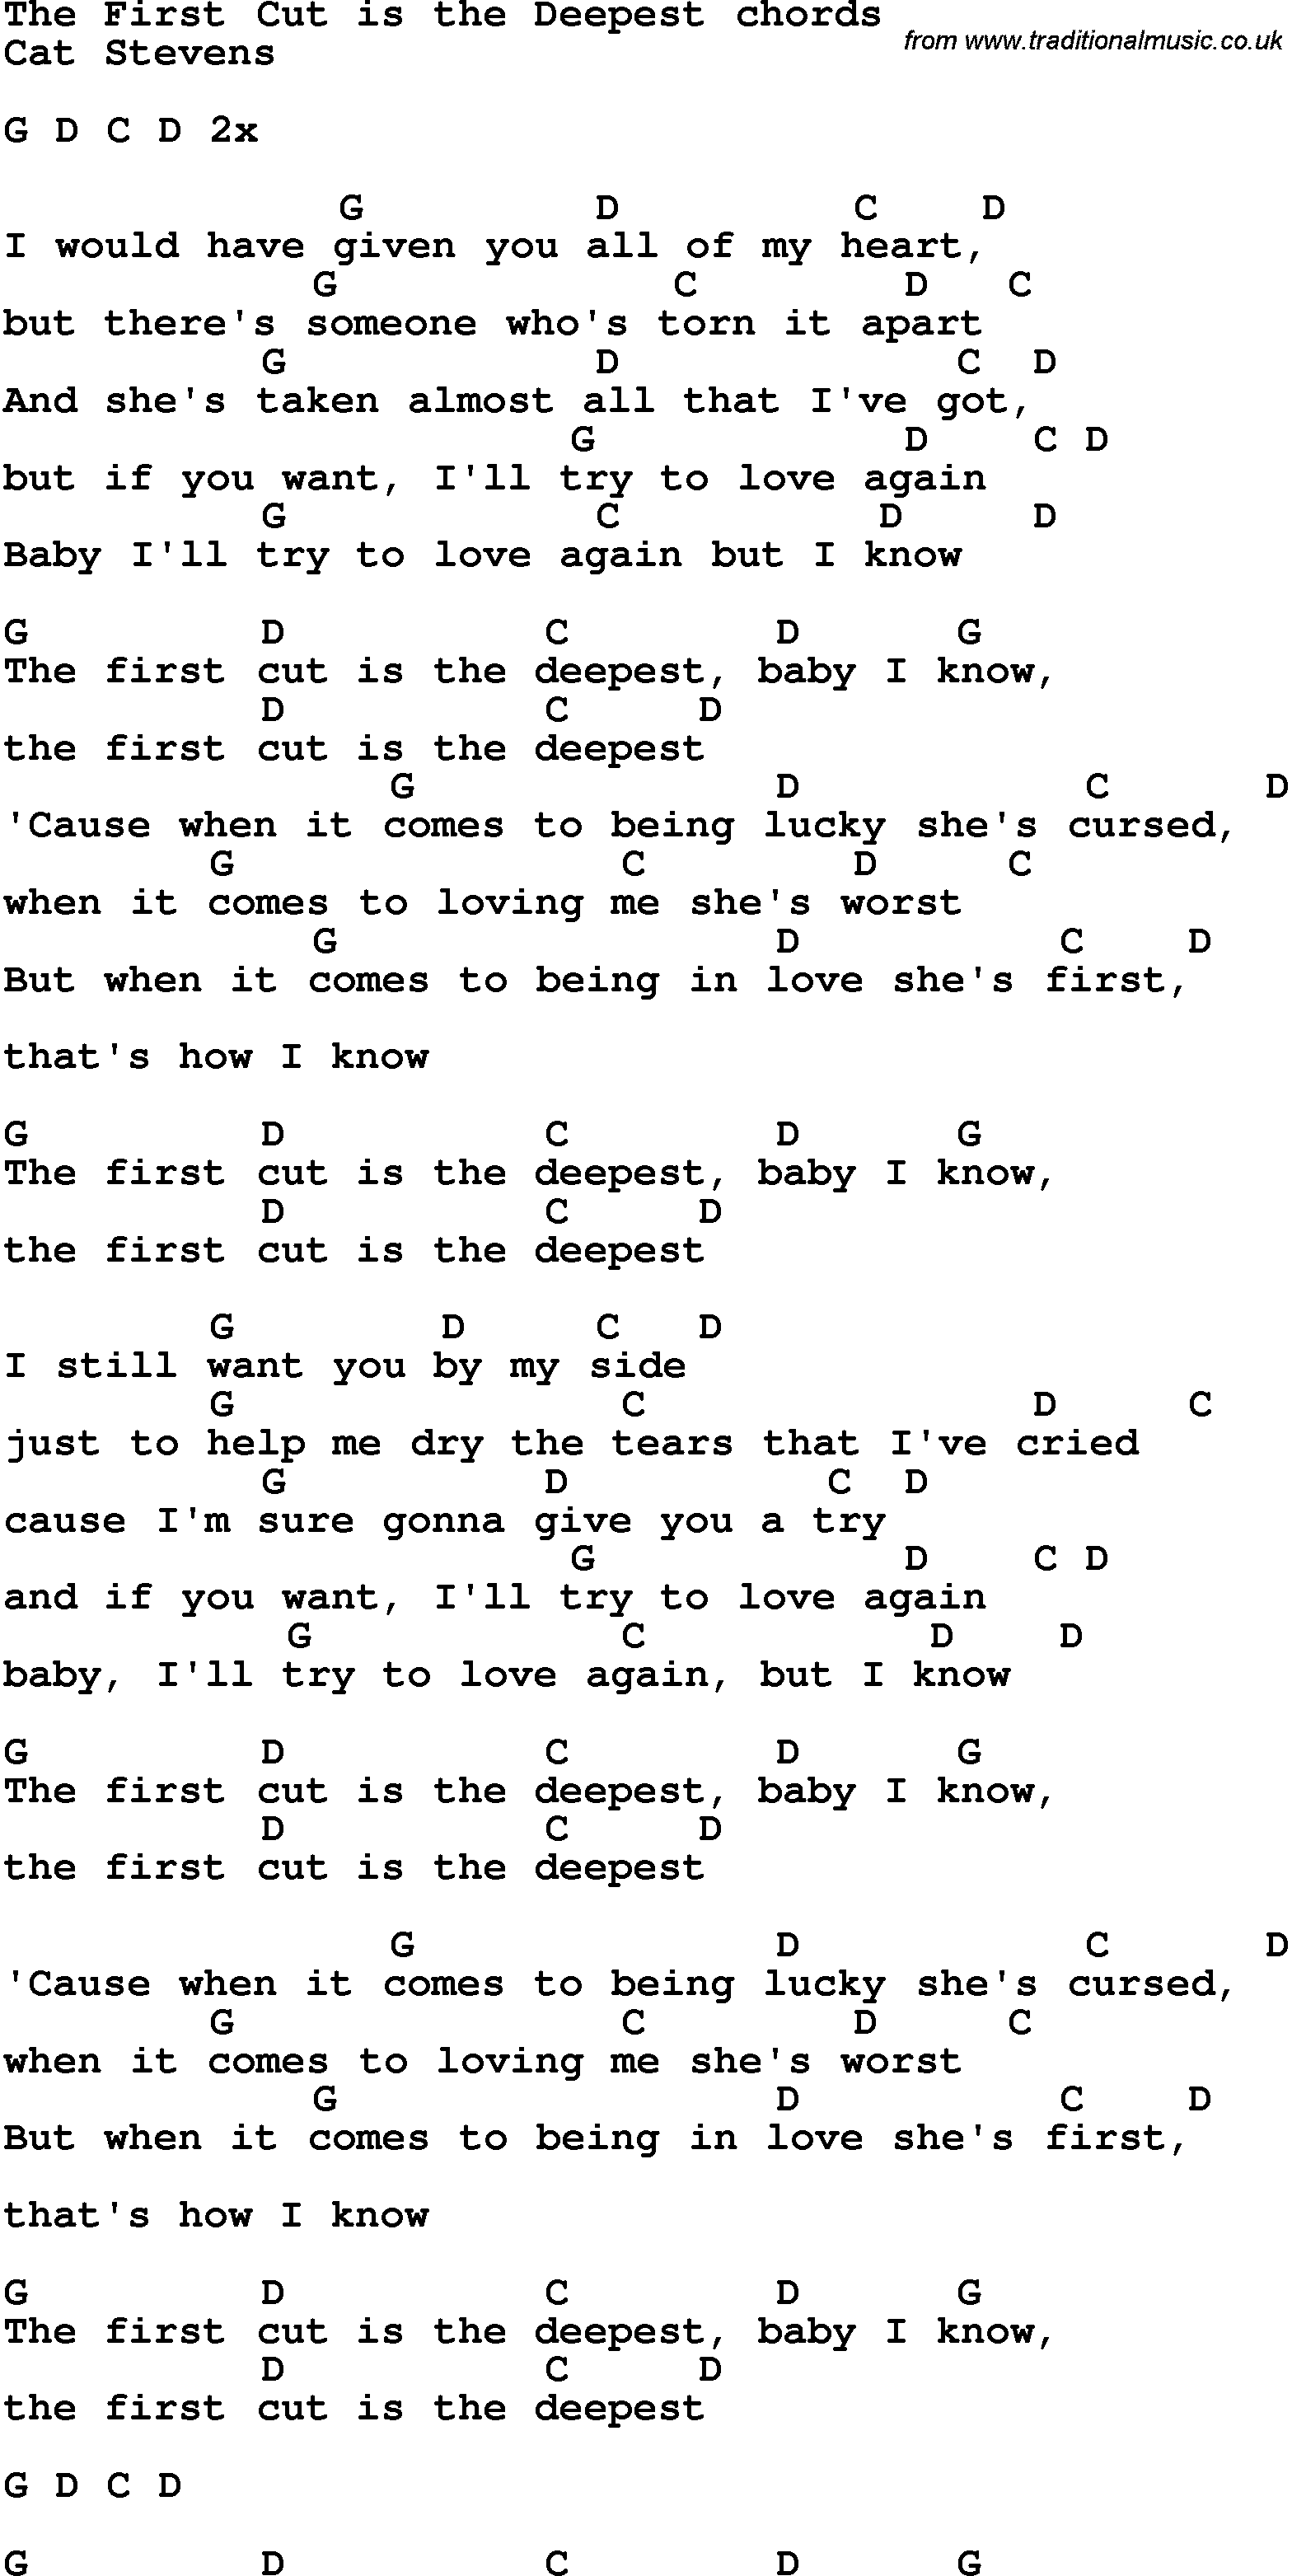 Song Lyrics with guitar chords for The First Cut Is The Deepest - Cat Stevens